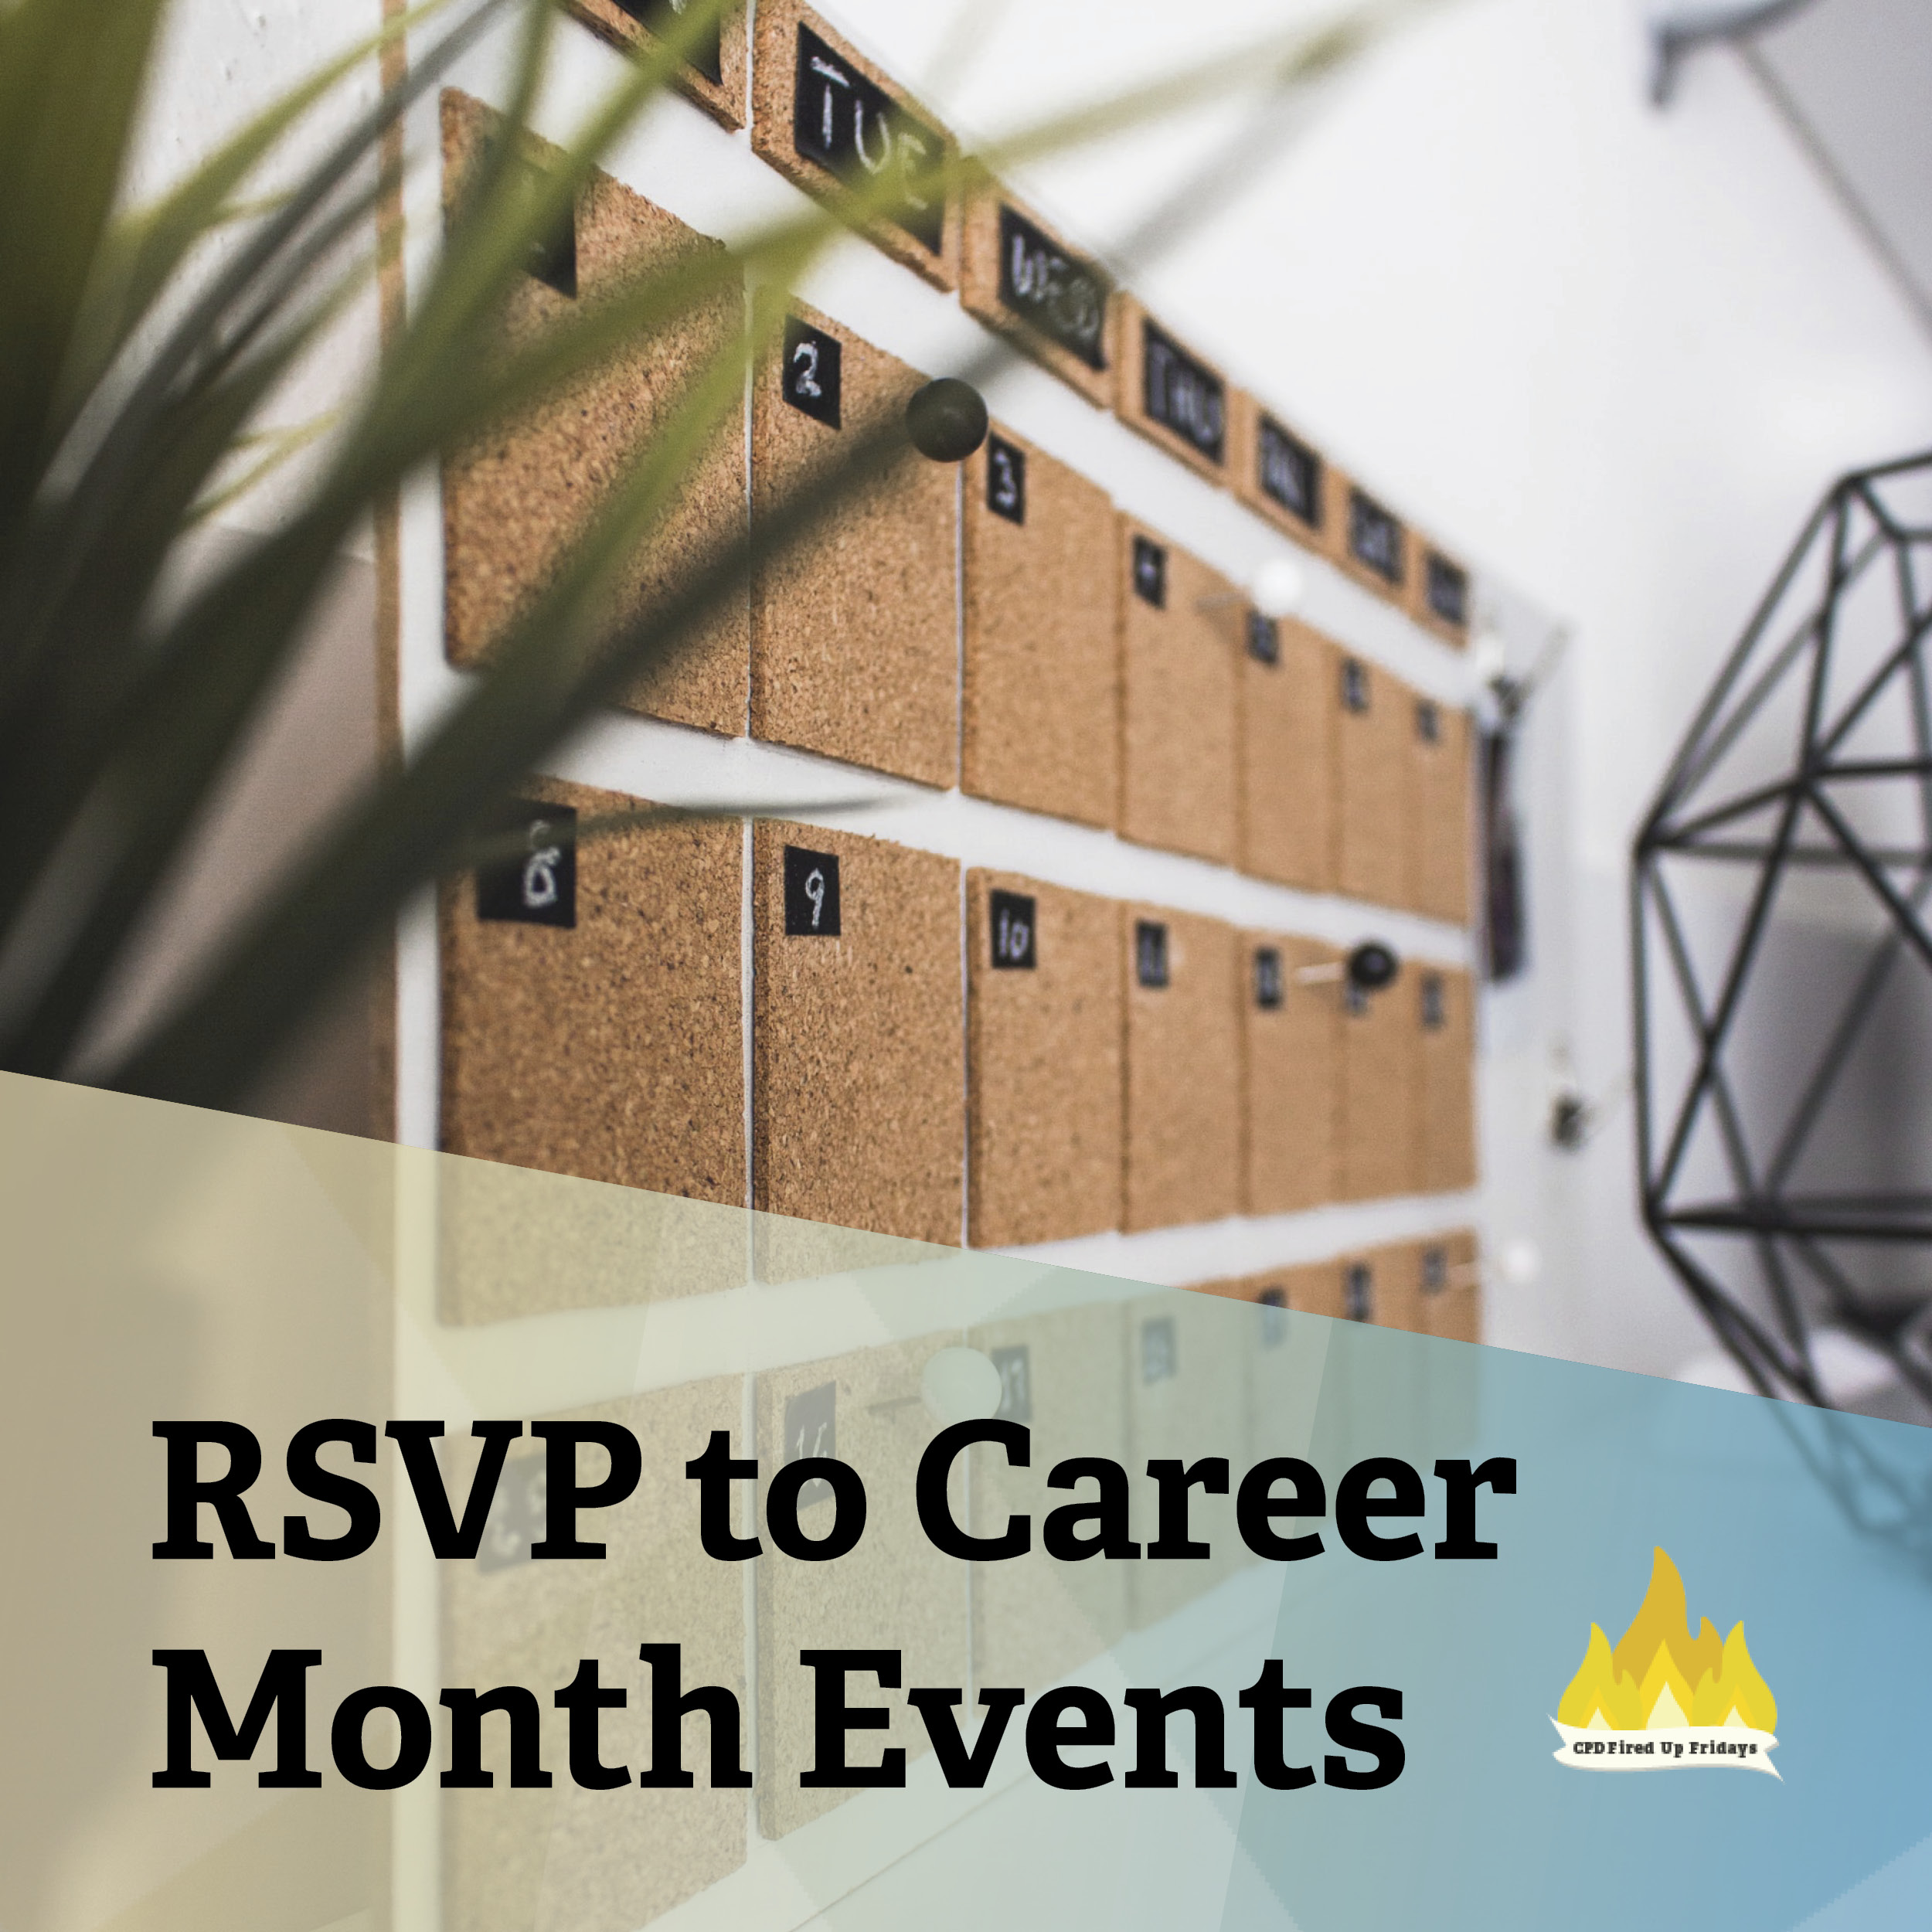 Just past the thin leaves of a plant, a corkboard calendar is visible on the wall. Text underneath reads: 'RSVP to Career Month Events.'